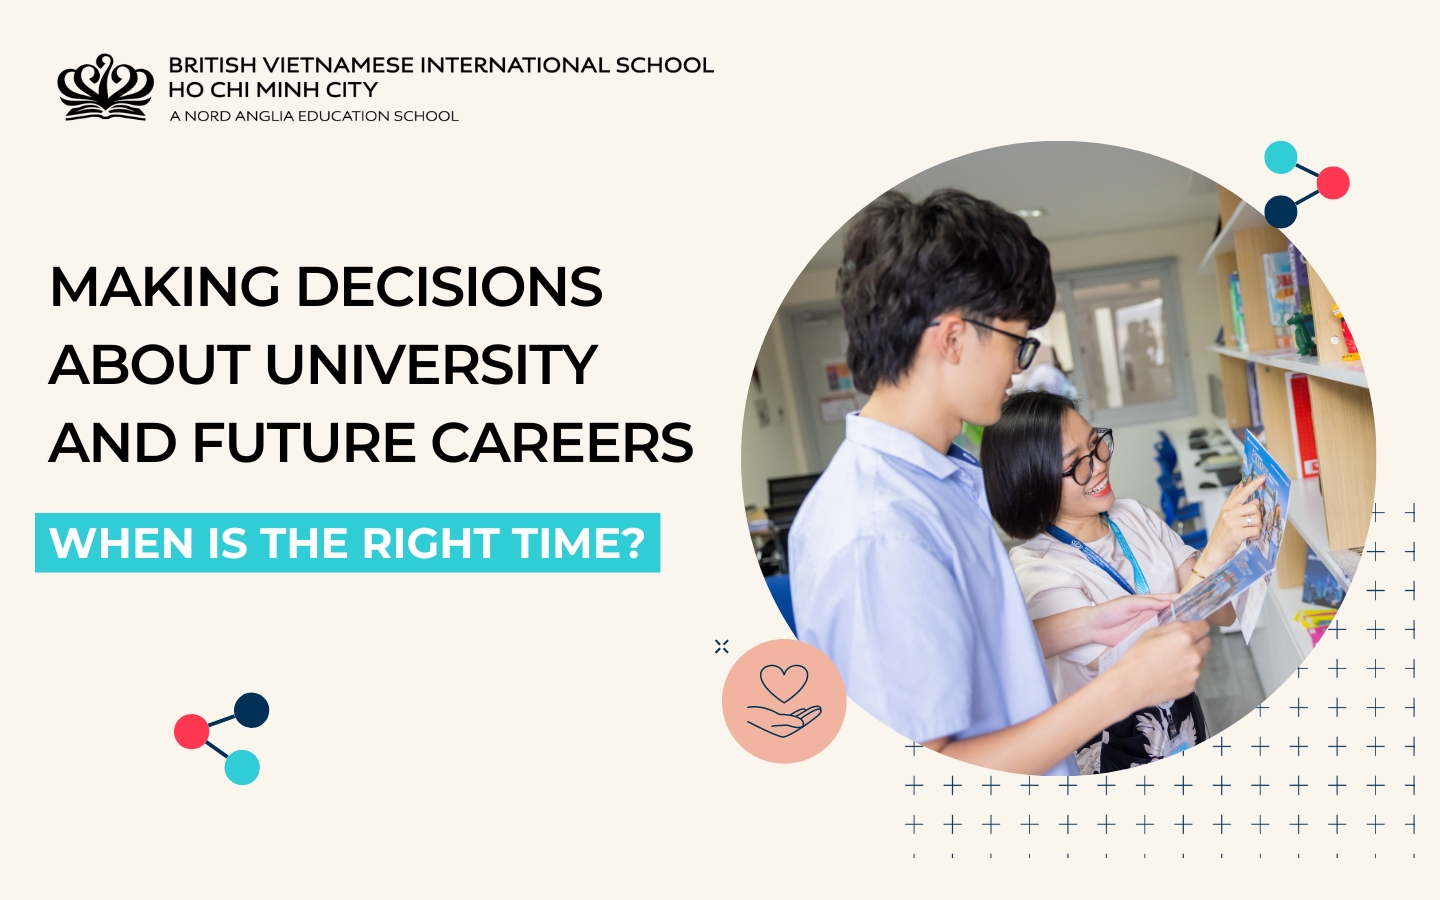 Making decisions about university and future careers: When is the right time?-Making decisions about university and future careers When is the right time-Making decisions about university and future careers (6)